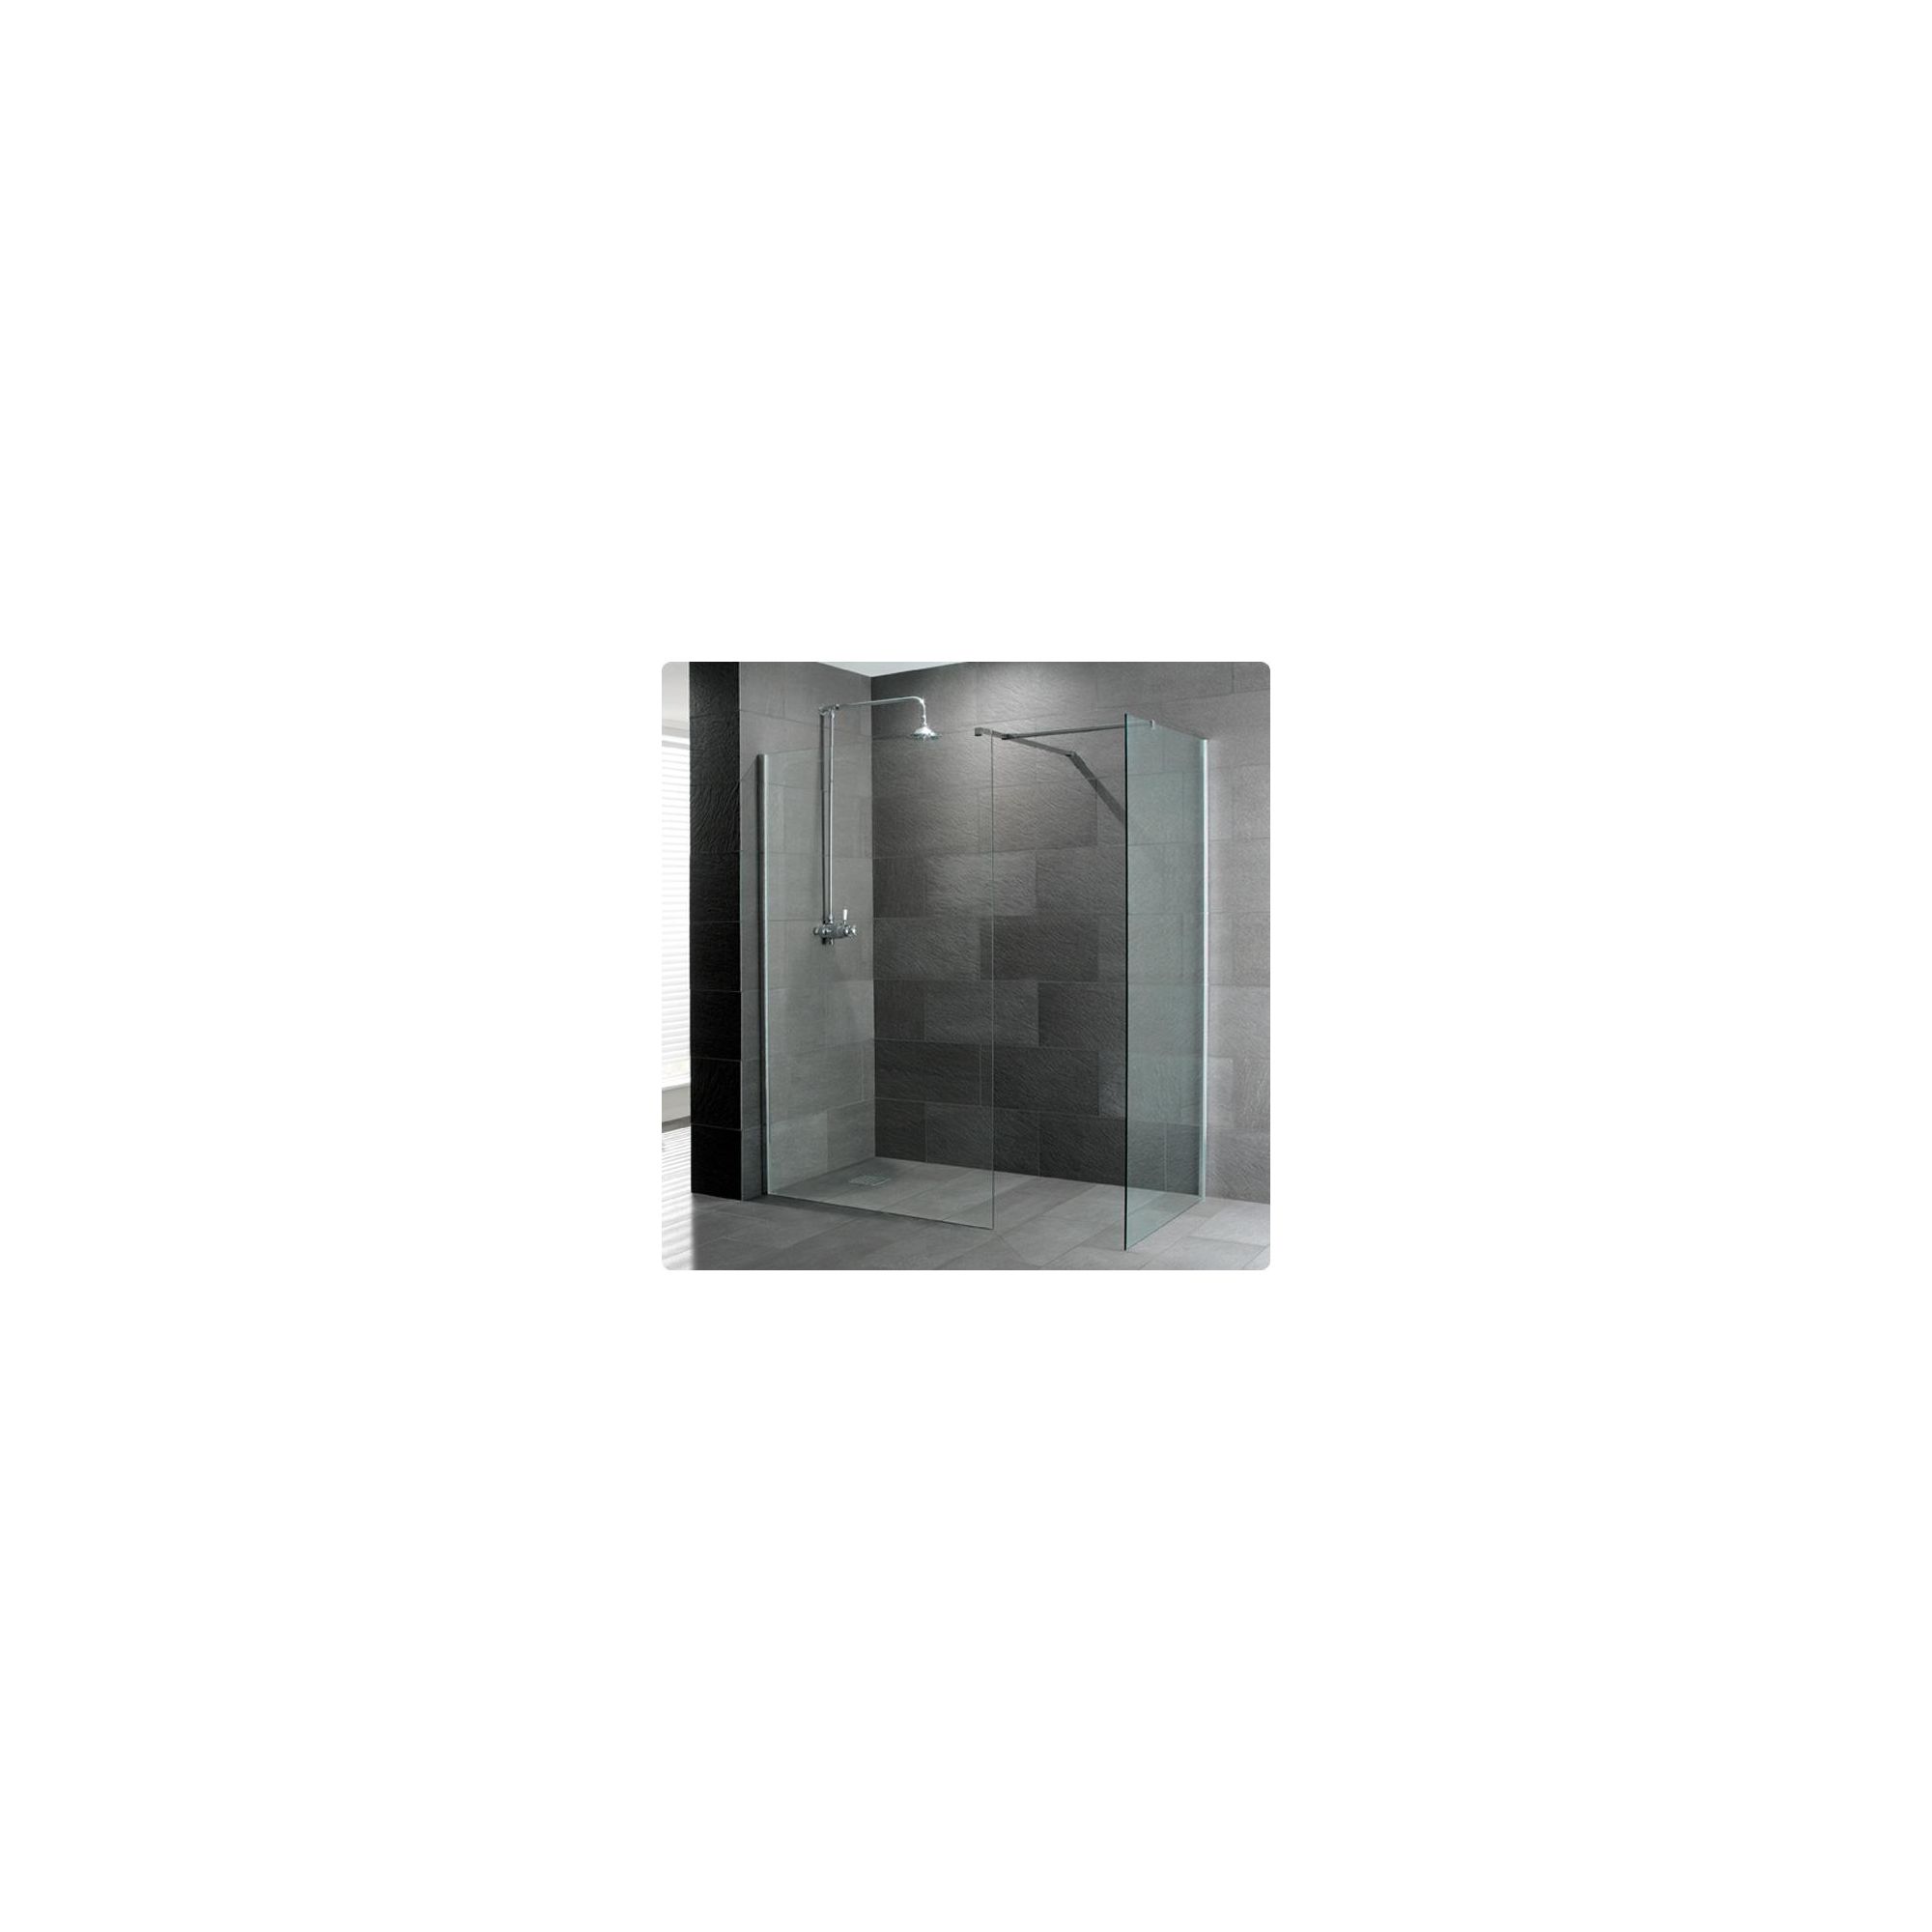 Duchy Supreme Silver Walk-In Shower Enclosure 1700mm x 700mm, Standard Tray, 8mm Glass at Tesco Direct